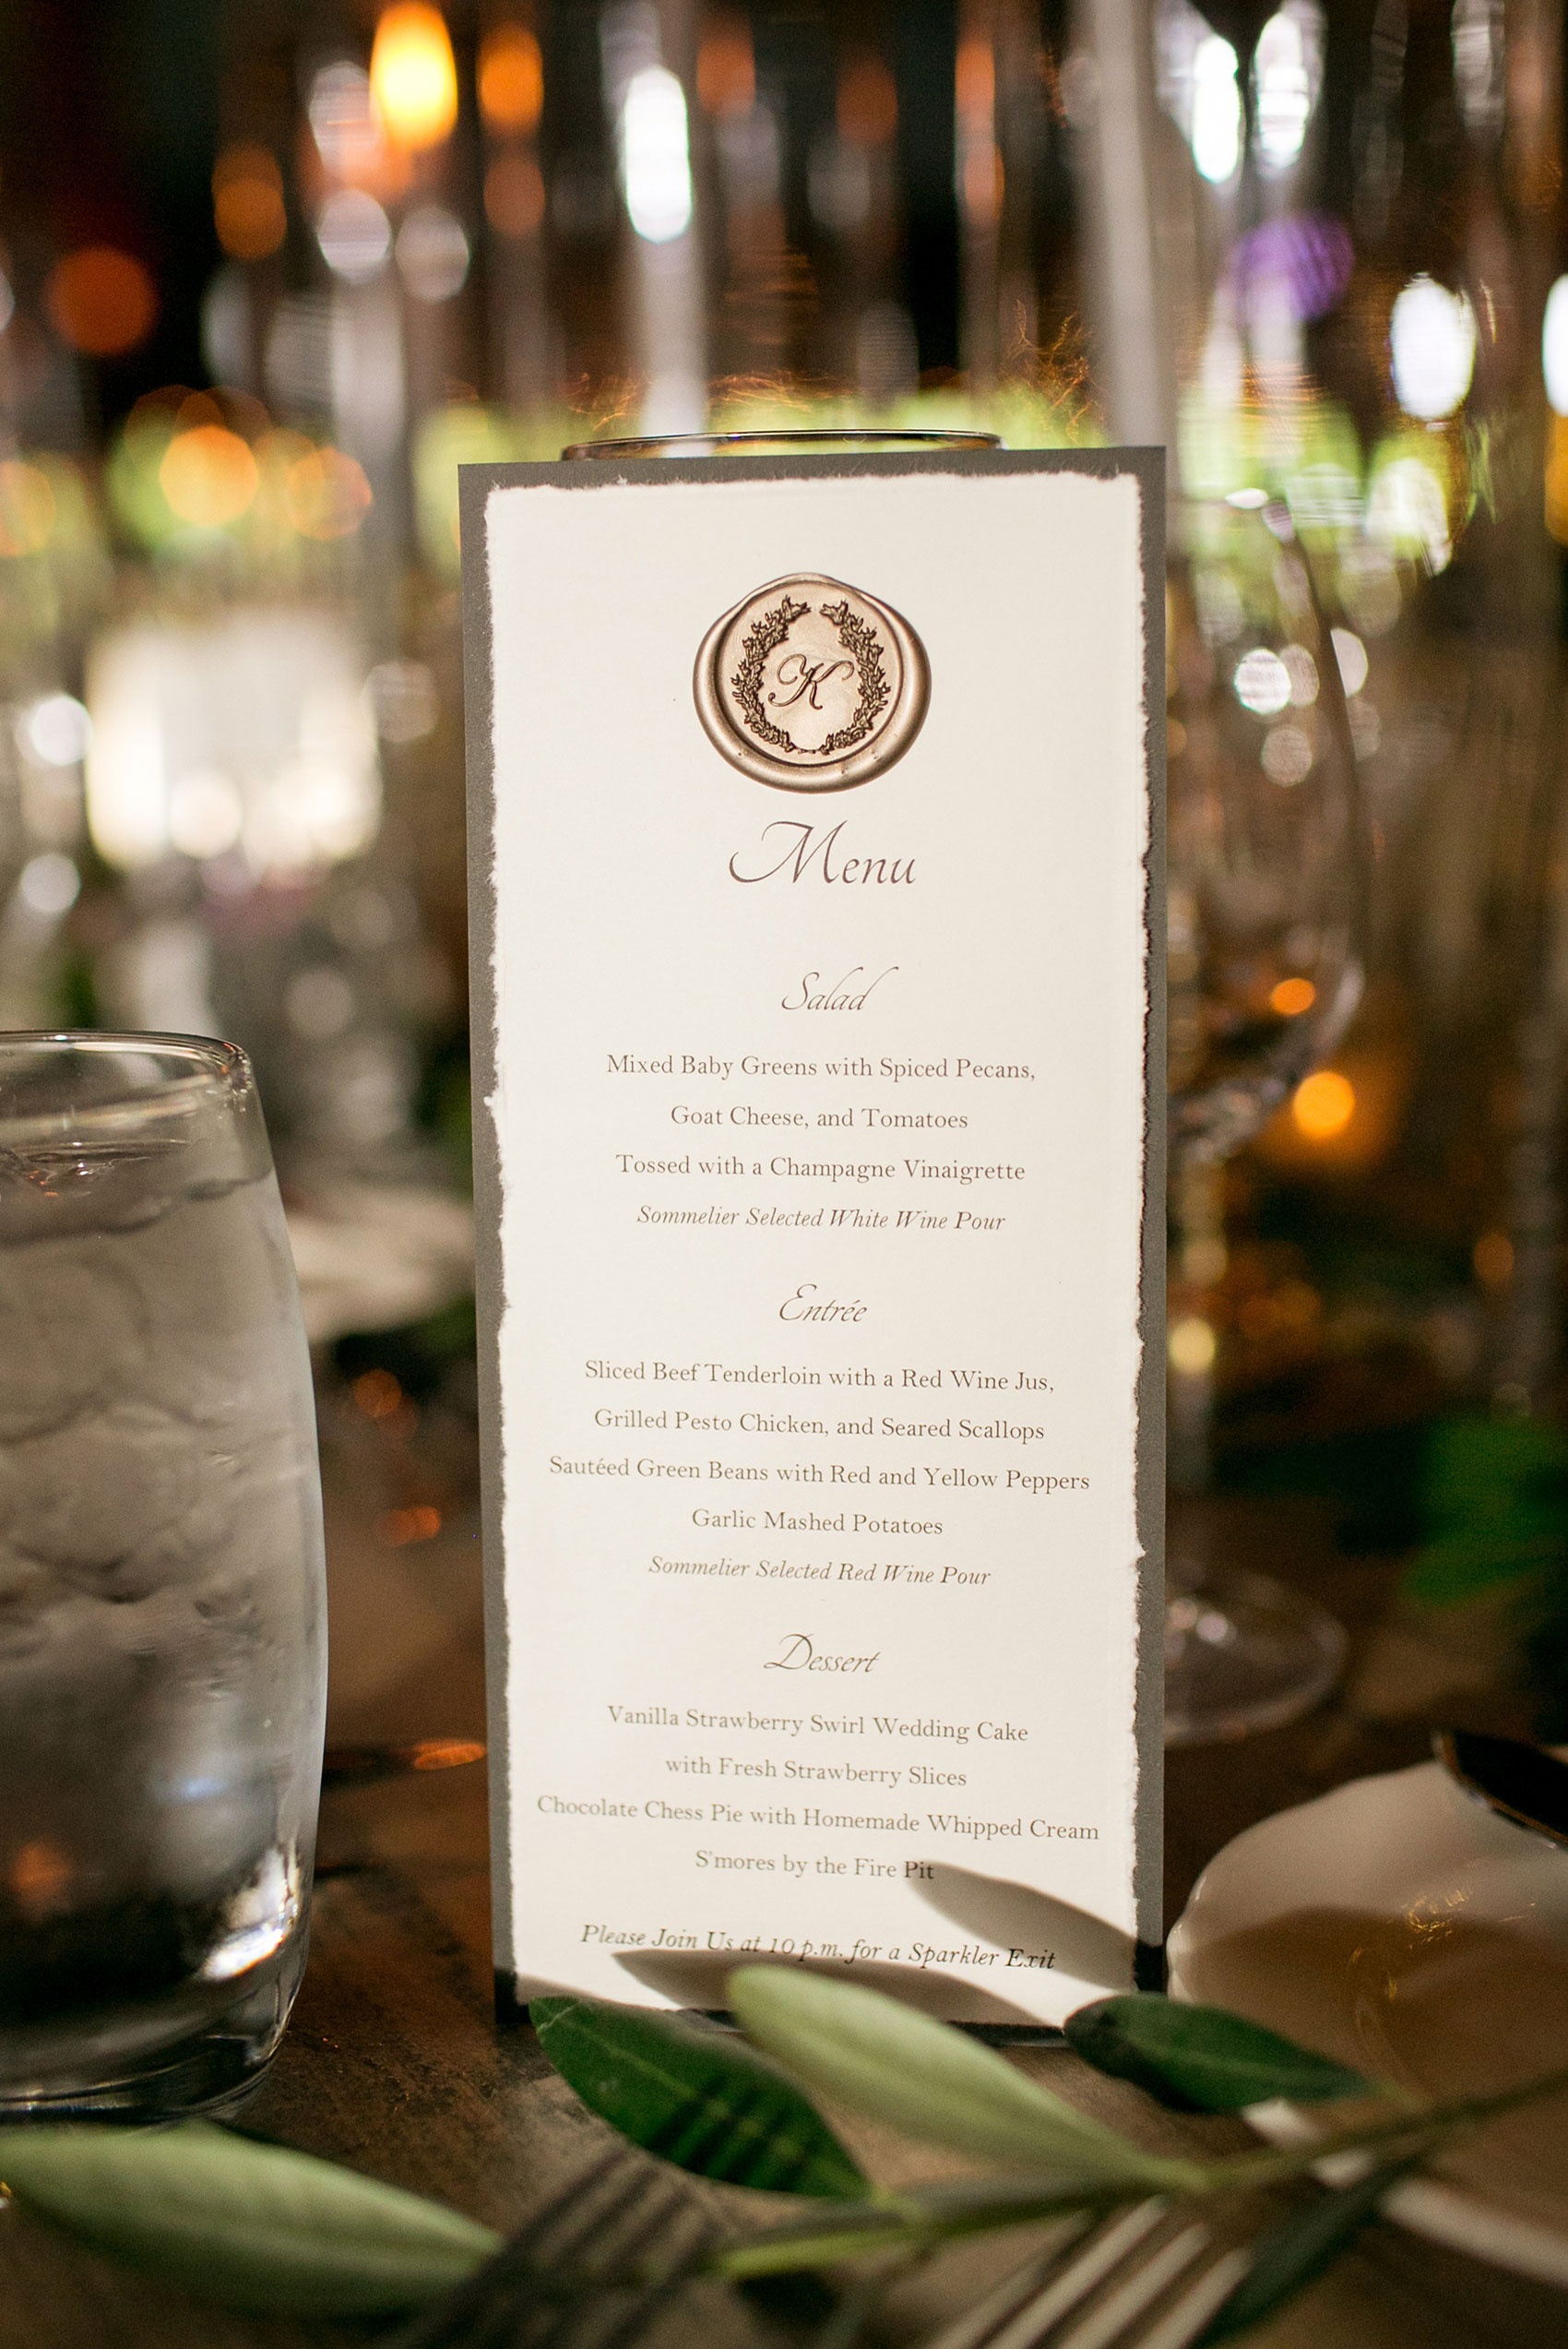 Pavilion at Angus Barn wedding photos by Mikkel Paige Photography. Picture of the menu with the couple's signature monogram wax seal.